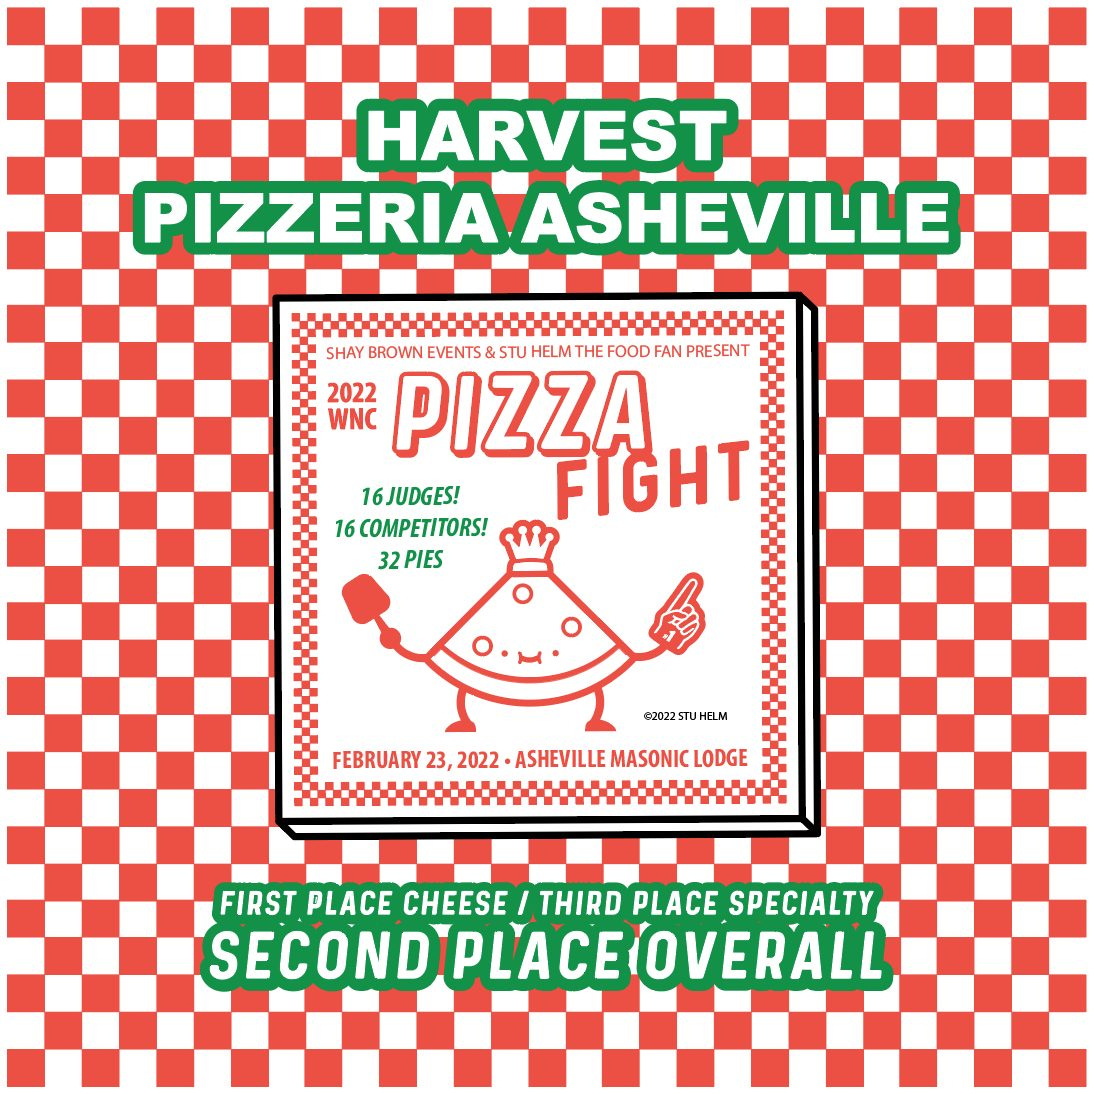 May be an image of pizza and text that says 'HARVEST PIZZERIA ASHEVILLE SHAY BROWN EVENTS STU HELM THE FOOD FAN PRESENT 2022 PIZZA WNC 16JUDGES! FIGHT 16COMPETITORS! 32PIES ©2022STUHELM FERAR2,22-ASHEVILLEMASONCLOGE ASHEVILLE MASONIC LODGE FEBRUARY 2022 FIRST PLACE CHEESE I THIRD PLACE SPECIALTY SECOND'PLACEOVERALL'